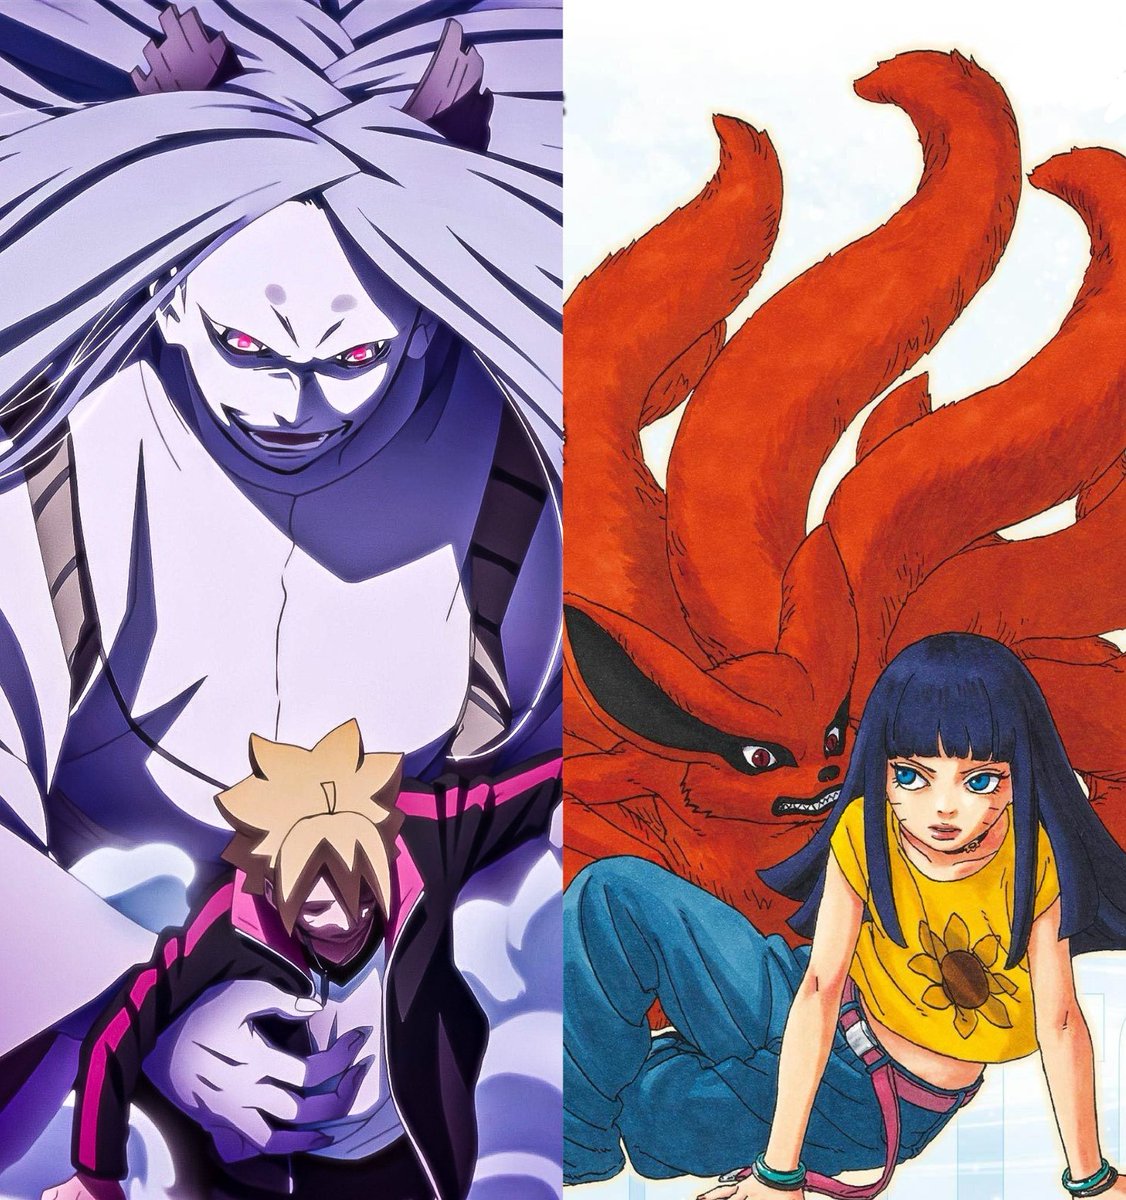 Momoshiki to Boruto: I see...You have the blood of one with the Byakugan flowing within you. 

Kurama to Himawari: Perhaps this was destiny, brought into being by the Uzumaki and Hyuga blood that flows within you.